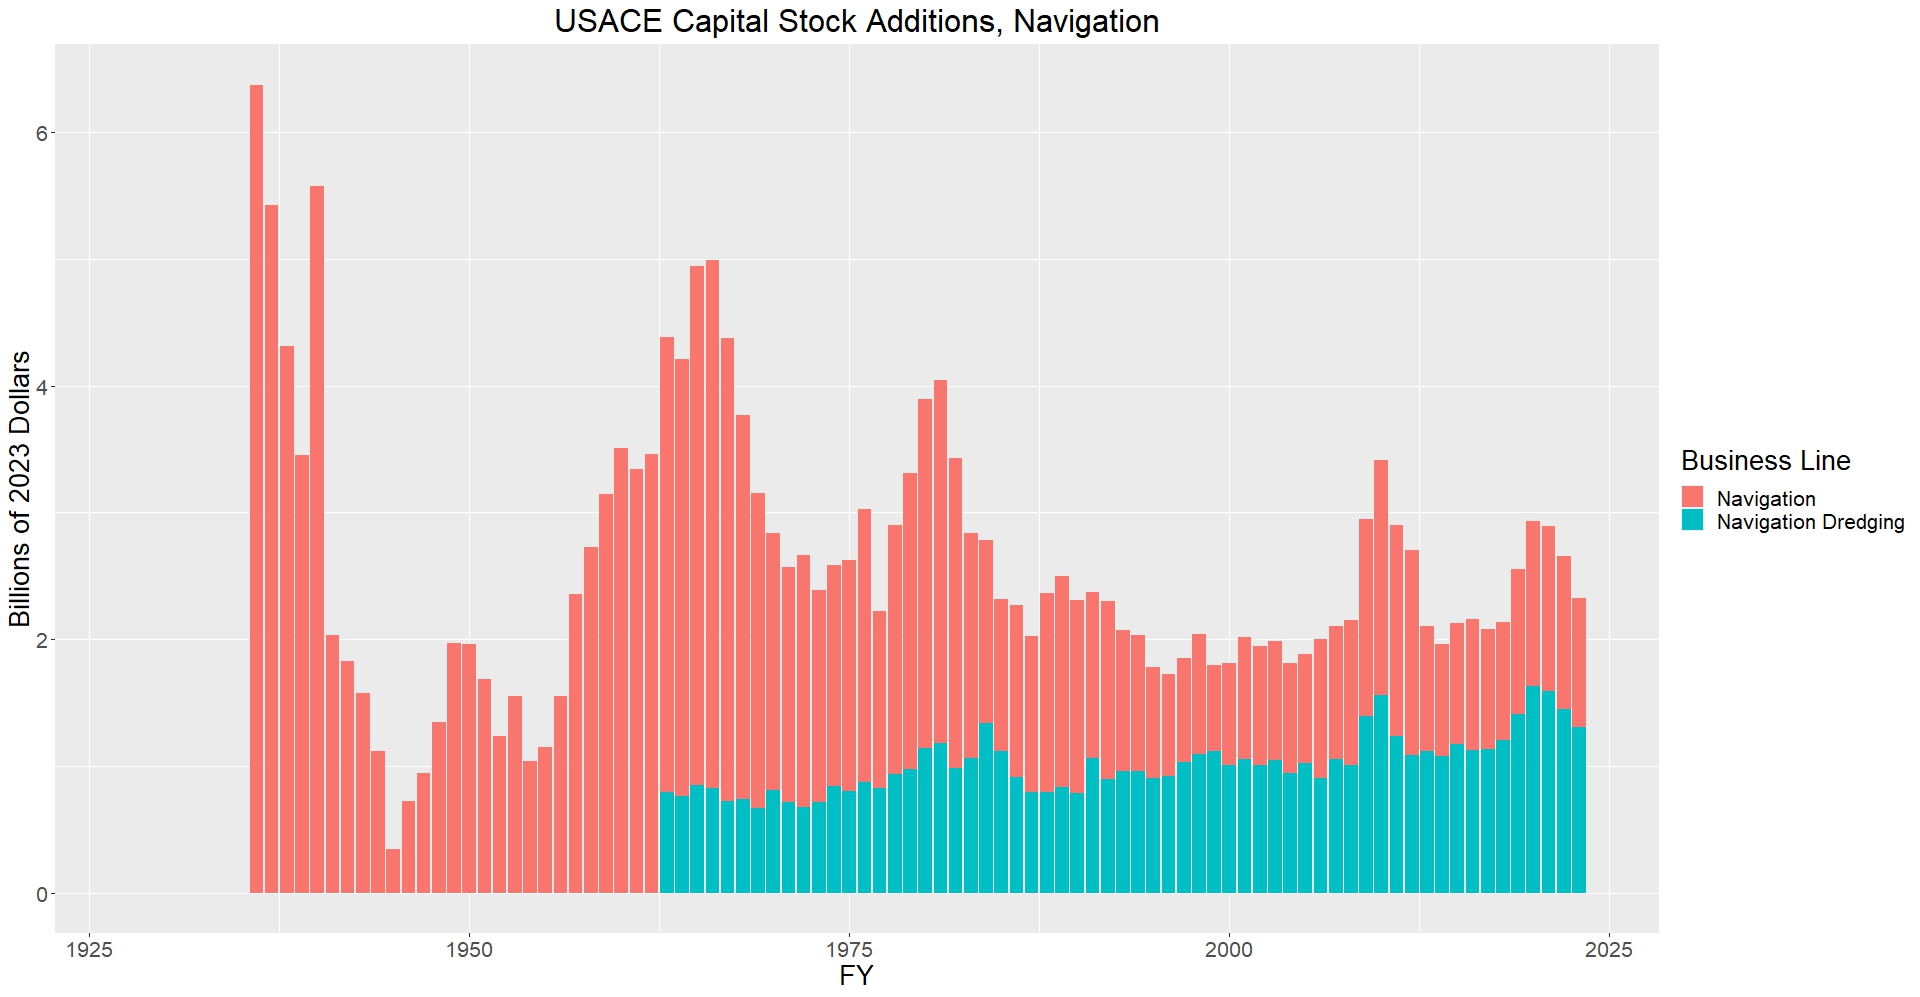 Graphic of USACE Capital Stock Additions for Navigation